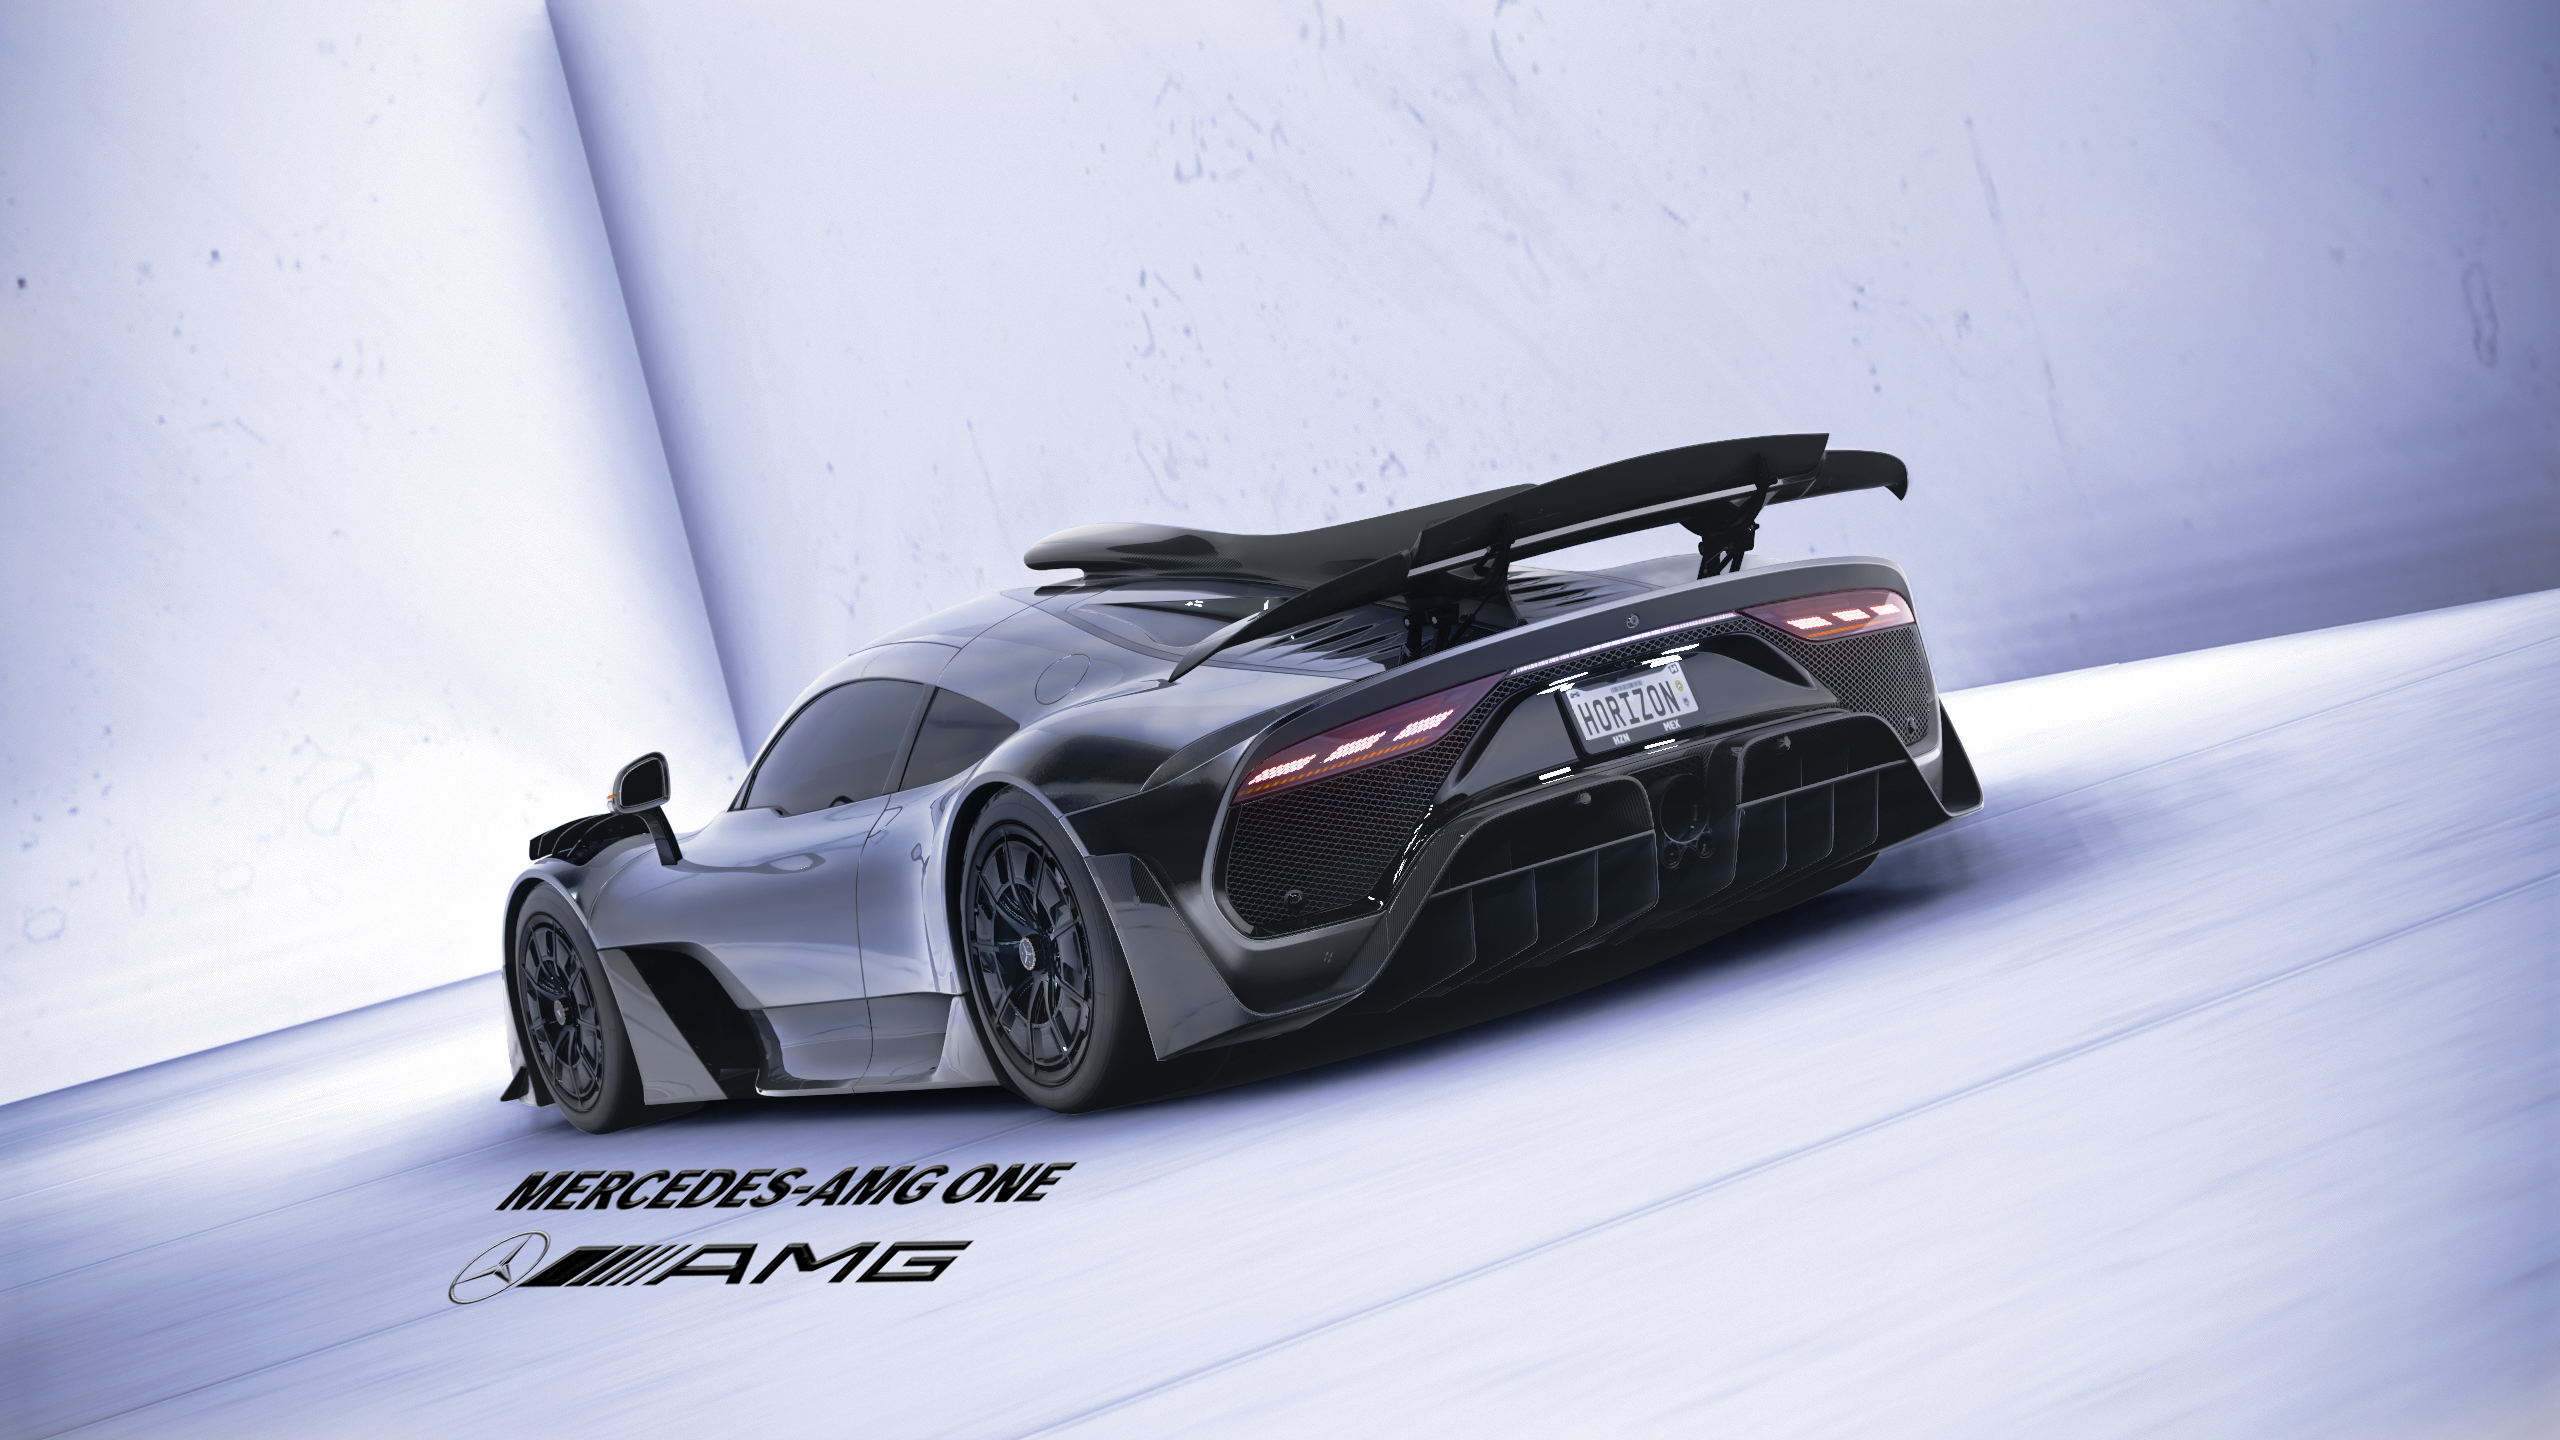 AMG ONE Forza Horizon 5 Mercedes AMG ONE Car Rear View Taillights Licence Plates 2560x1440